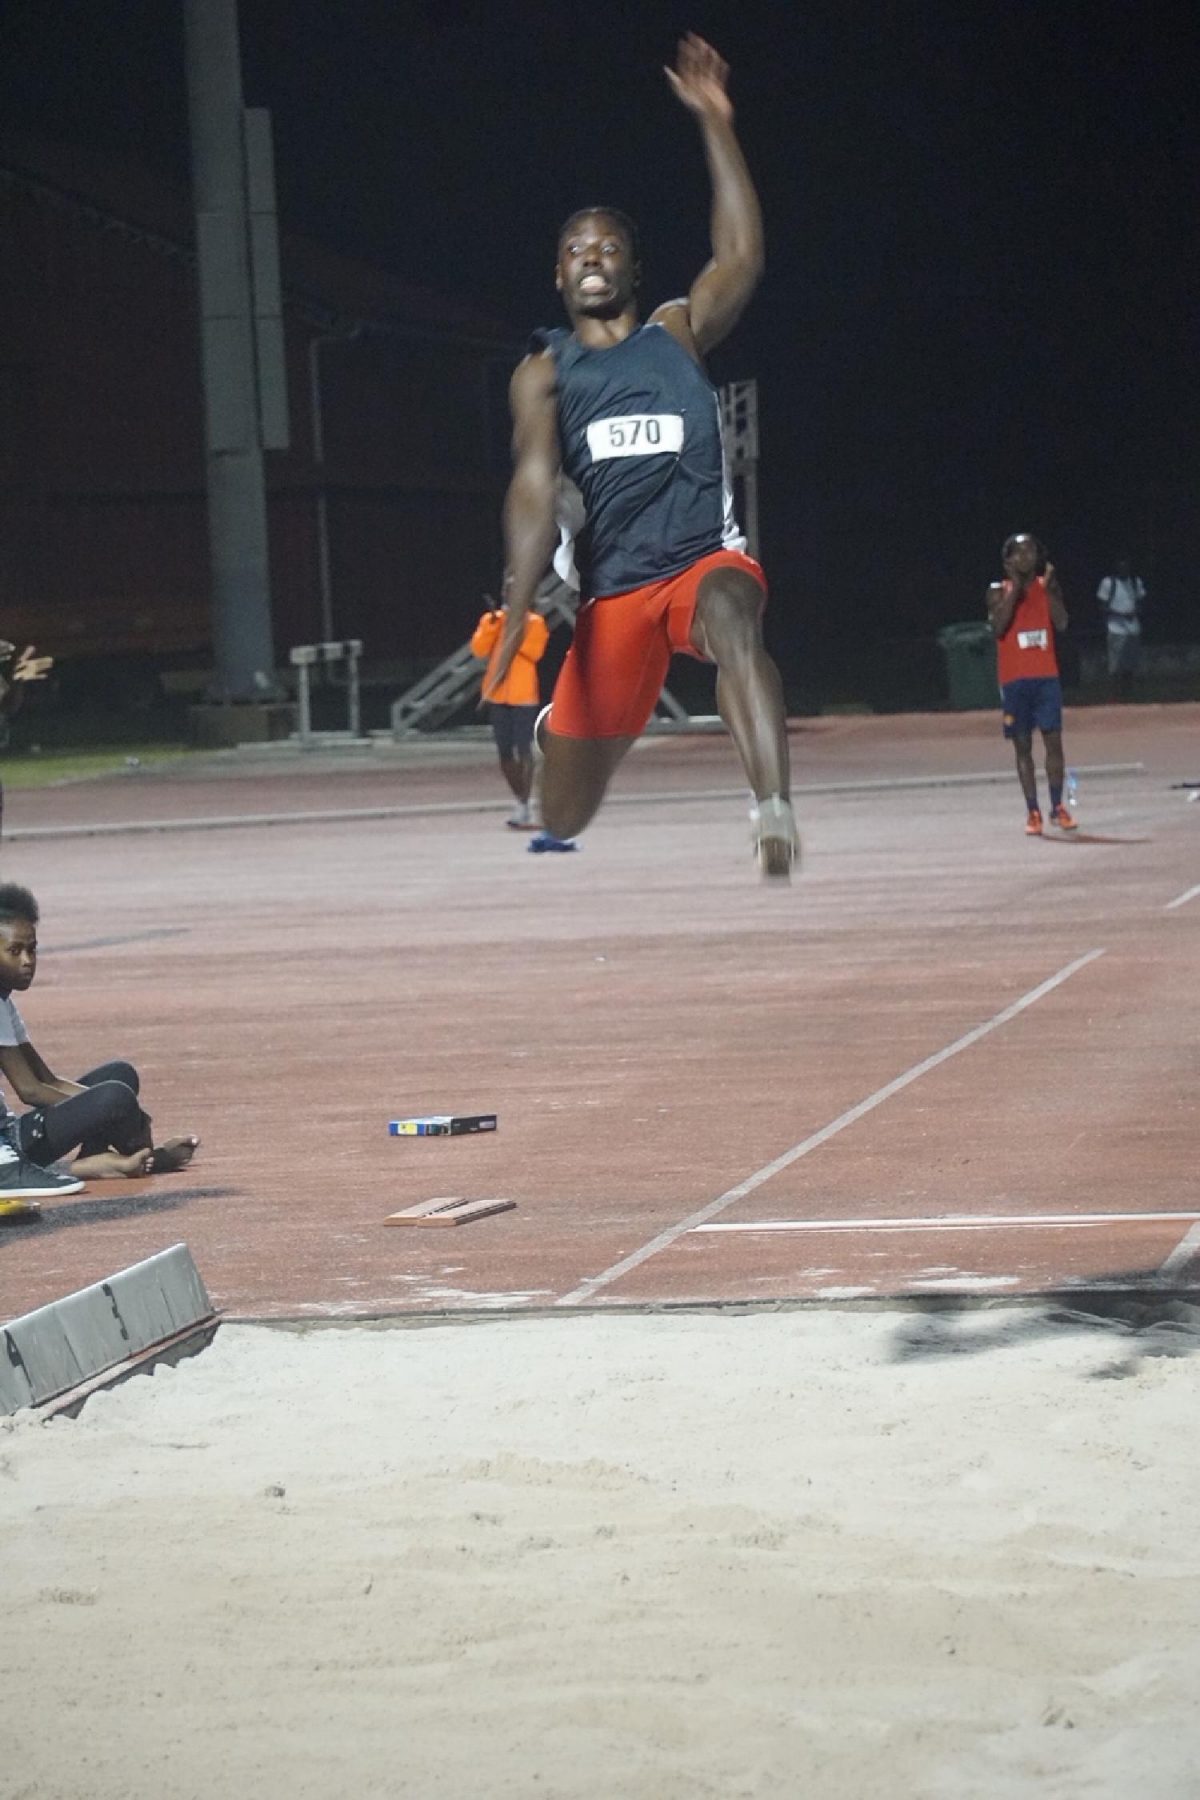 Long Jump National record holder, Emanuel Archibald disturbed the sand with a best jump of 8.07m yesterday. His aim to surpass the entry standard of 8.22m to earn his spot in Japan before the qualifying window closes on June 21. (Emmerson Campbell photo)